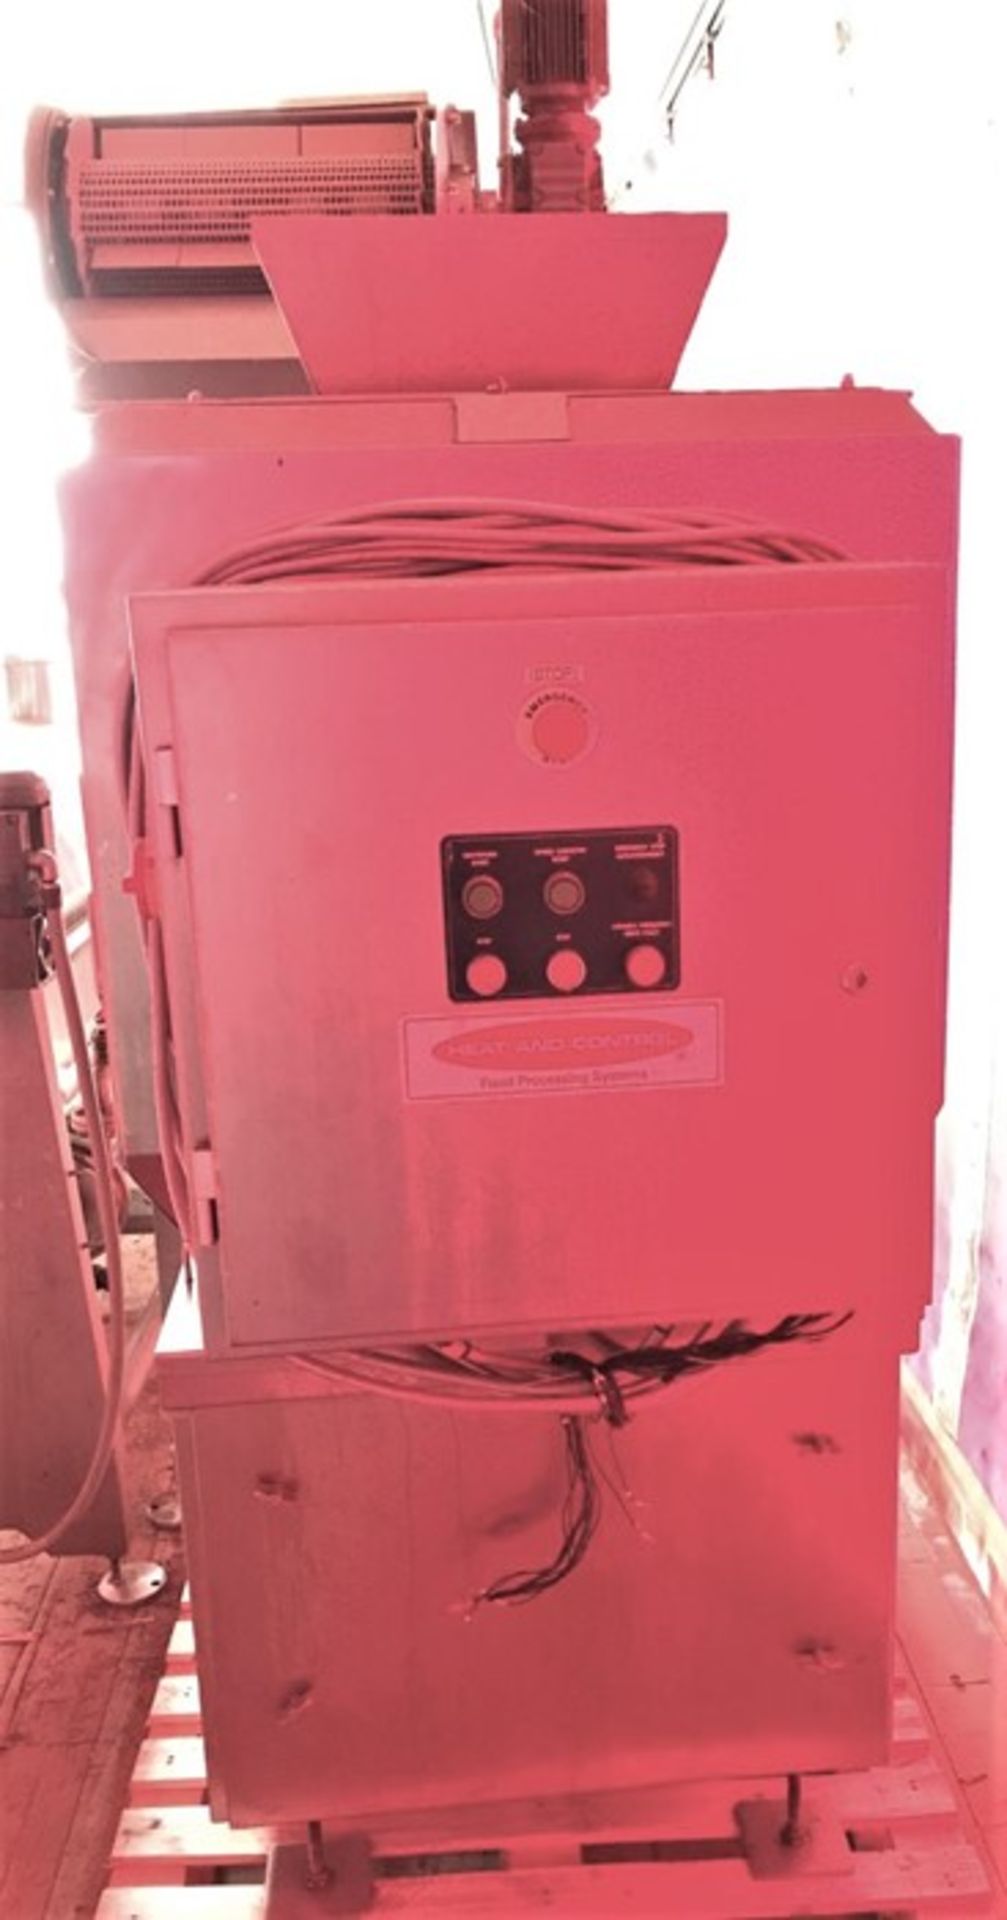 HEAT AND CONTROL ELECTRIC FRYER WITH CONTINUOUS DE-OILER - Image 14 of 24